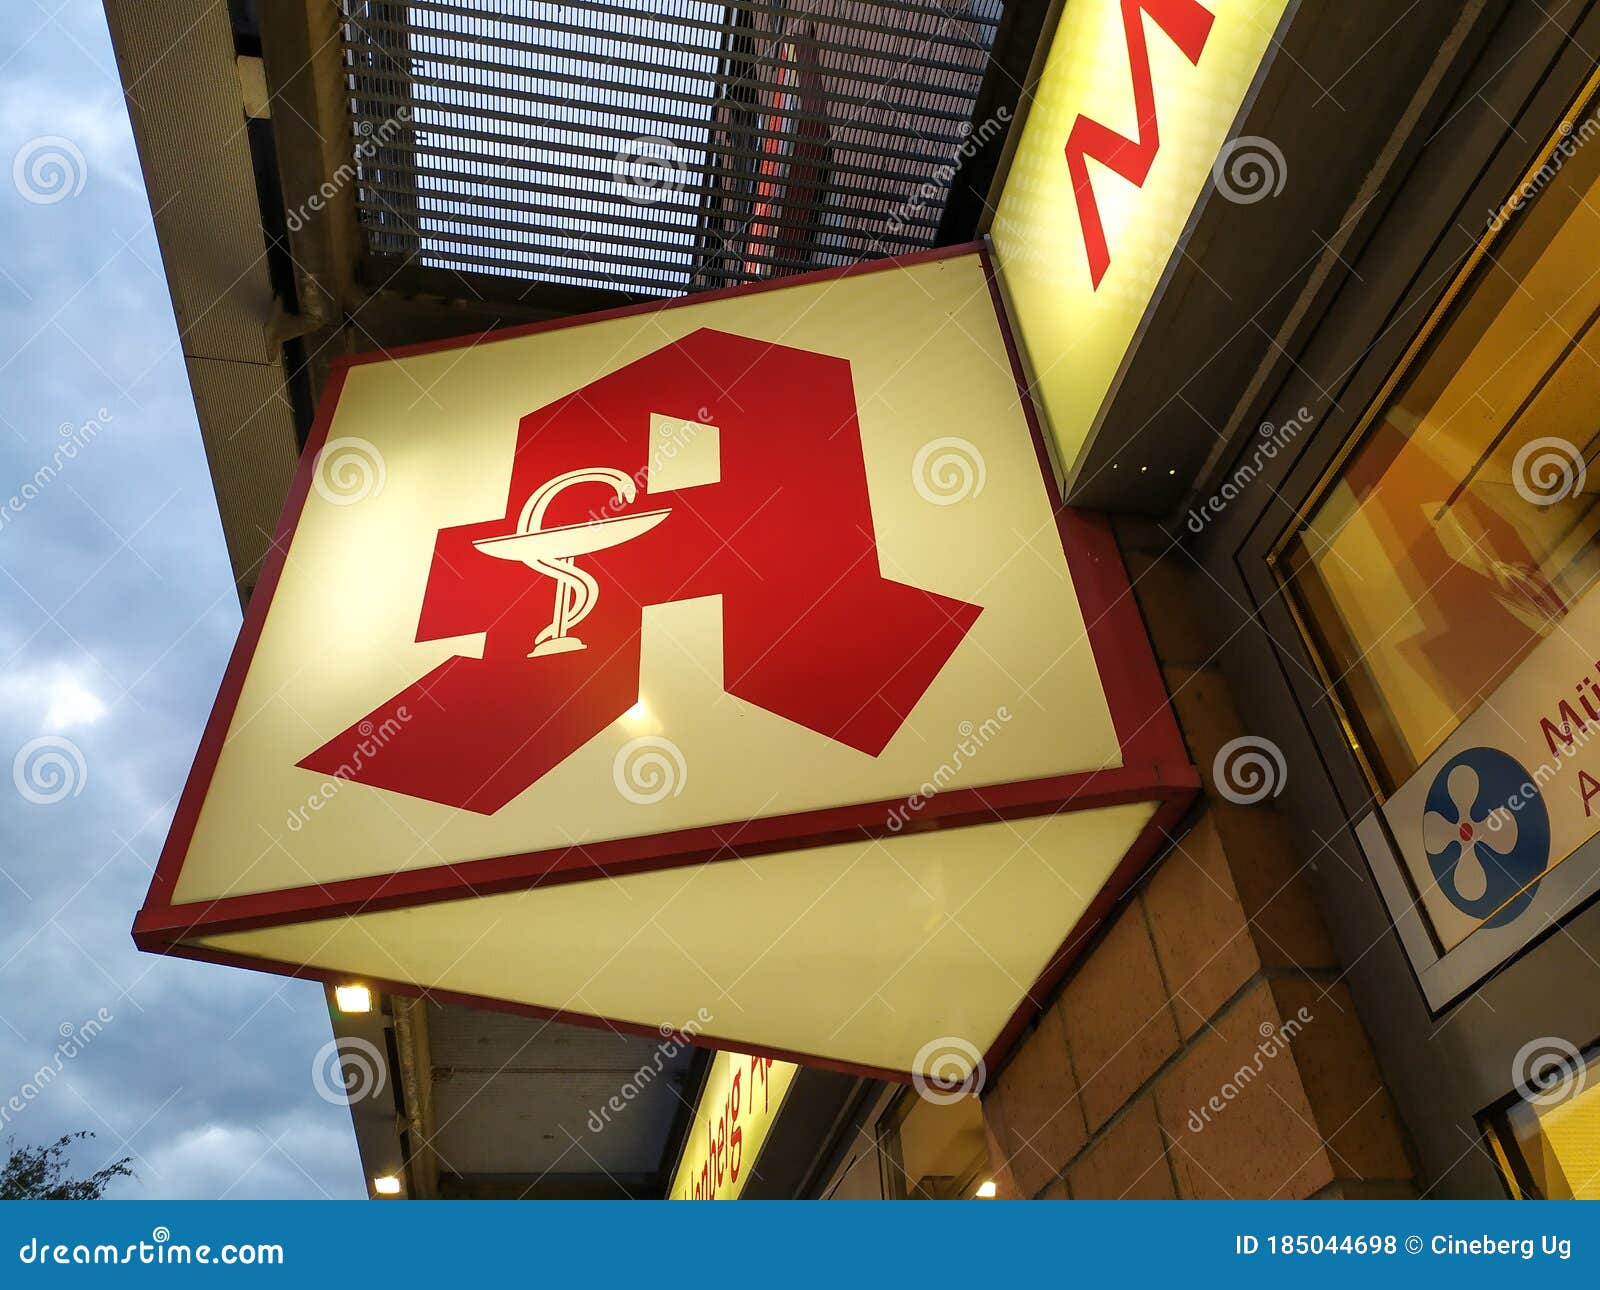 German pharmacy sign editorial stock photo. Image of advertise - 185044698